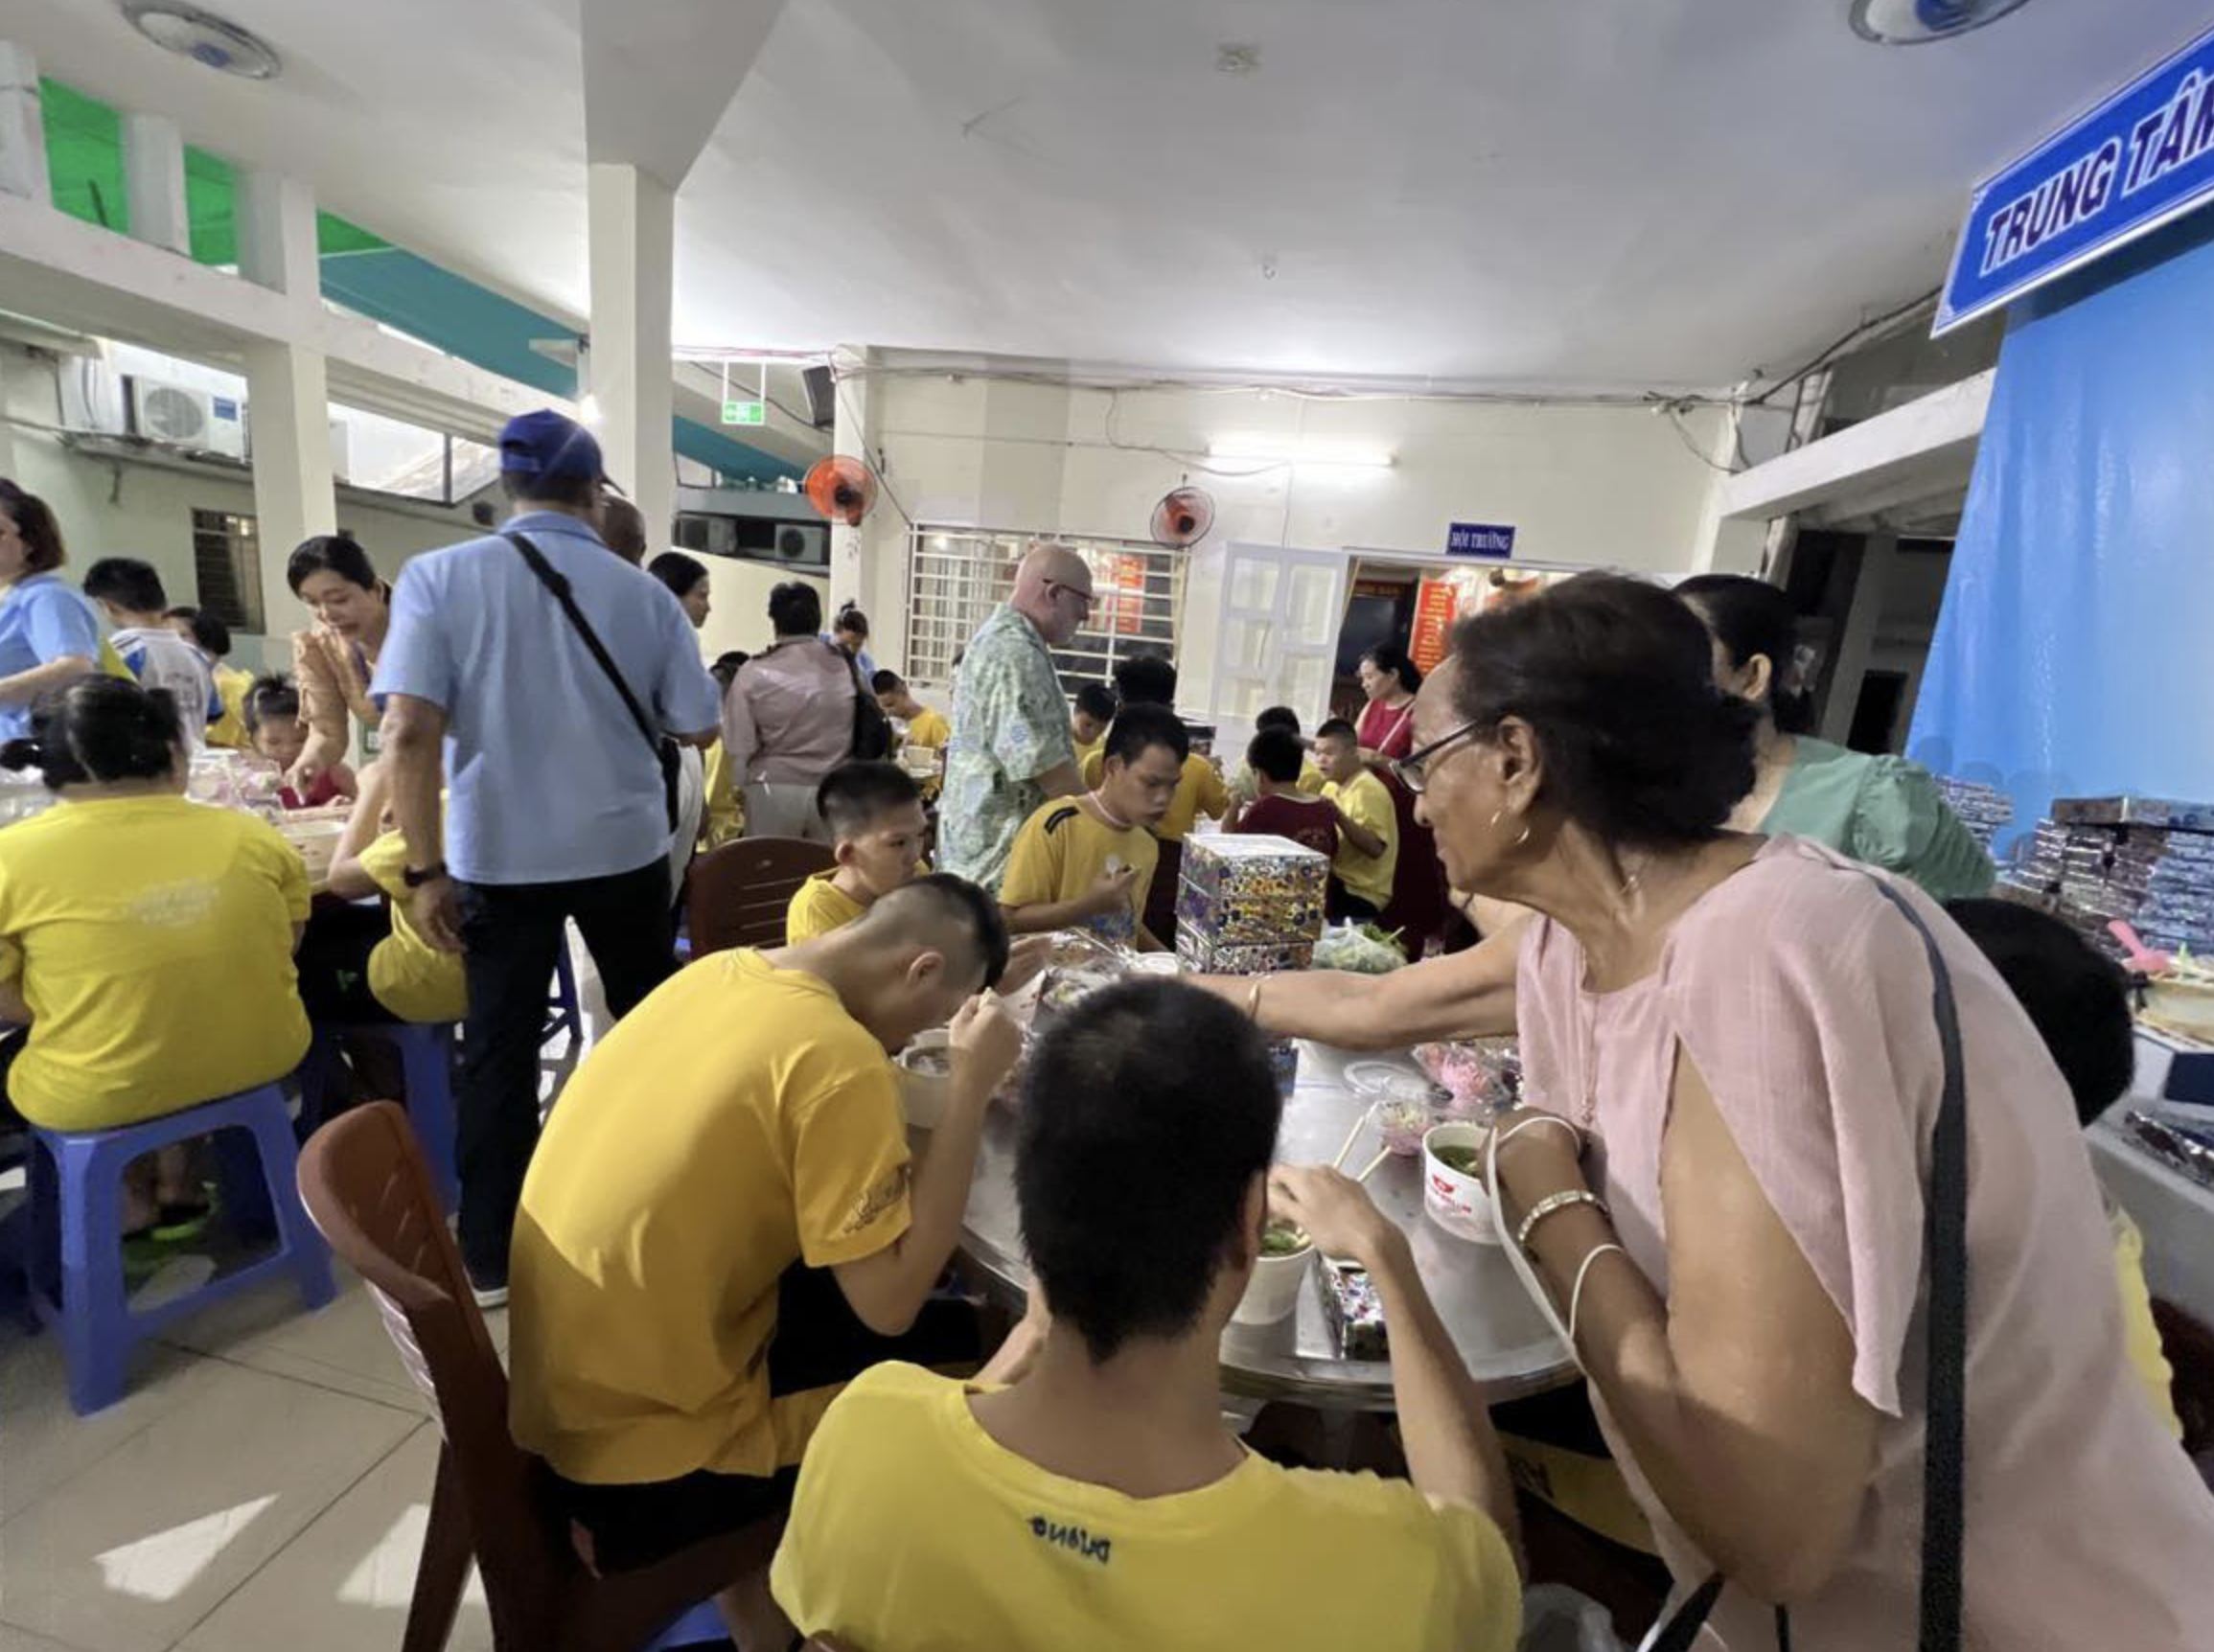 Rotary members provide meals for an orphanage in Go Vap District, Ho Chi Minh City. Photo: Minh Huynh / Tuoi Tre